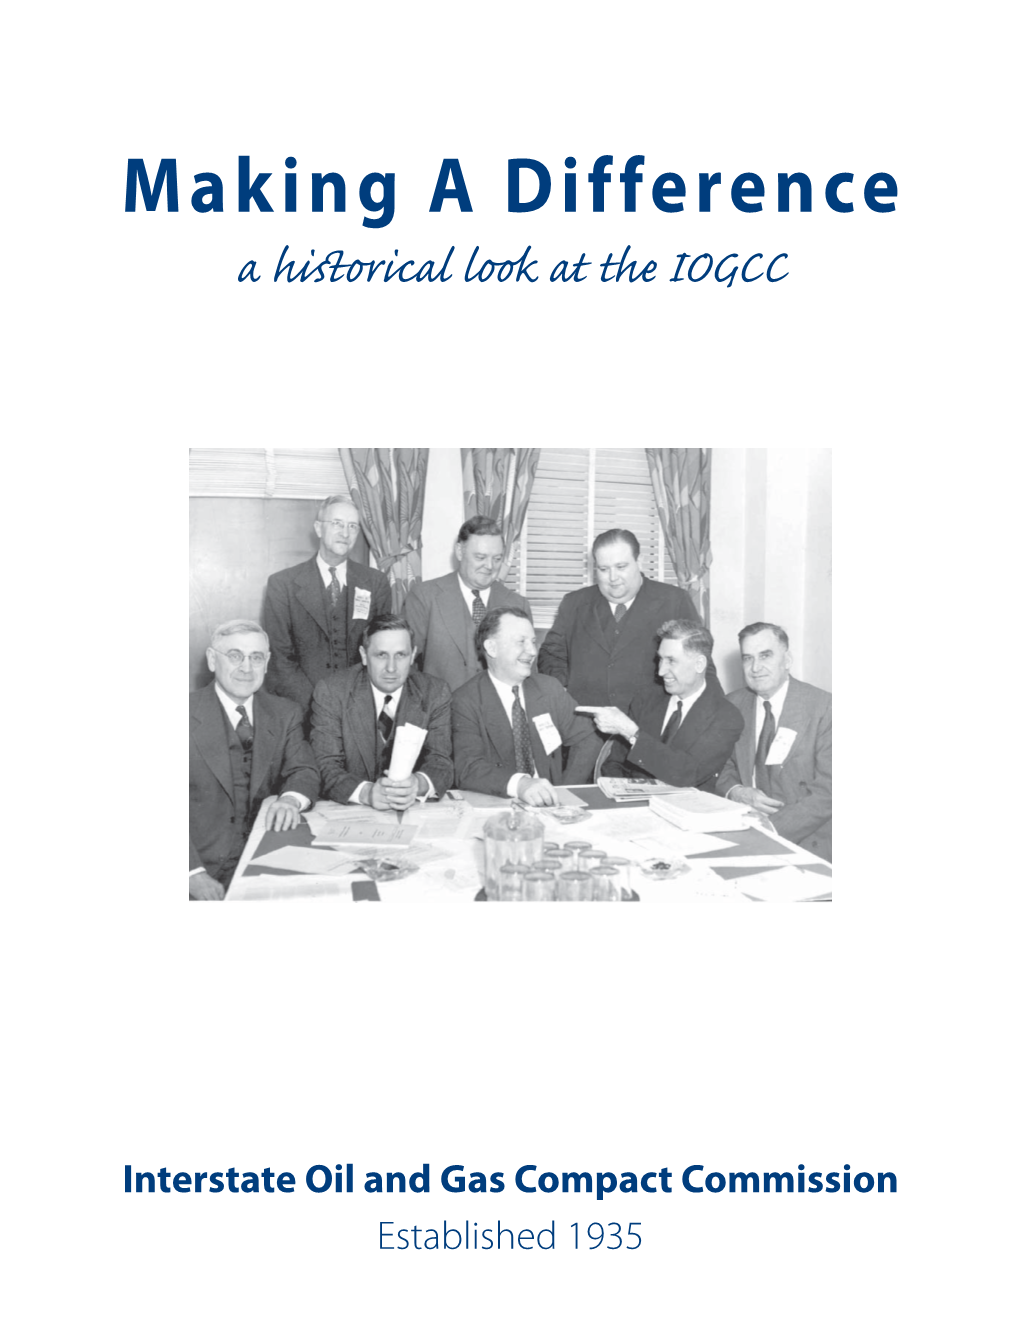 Making a Difference a Hiﬆ Orical Look at the IOGCC